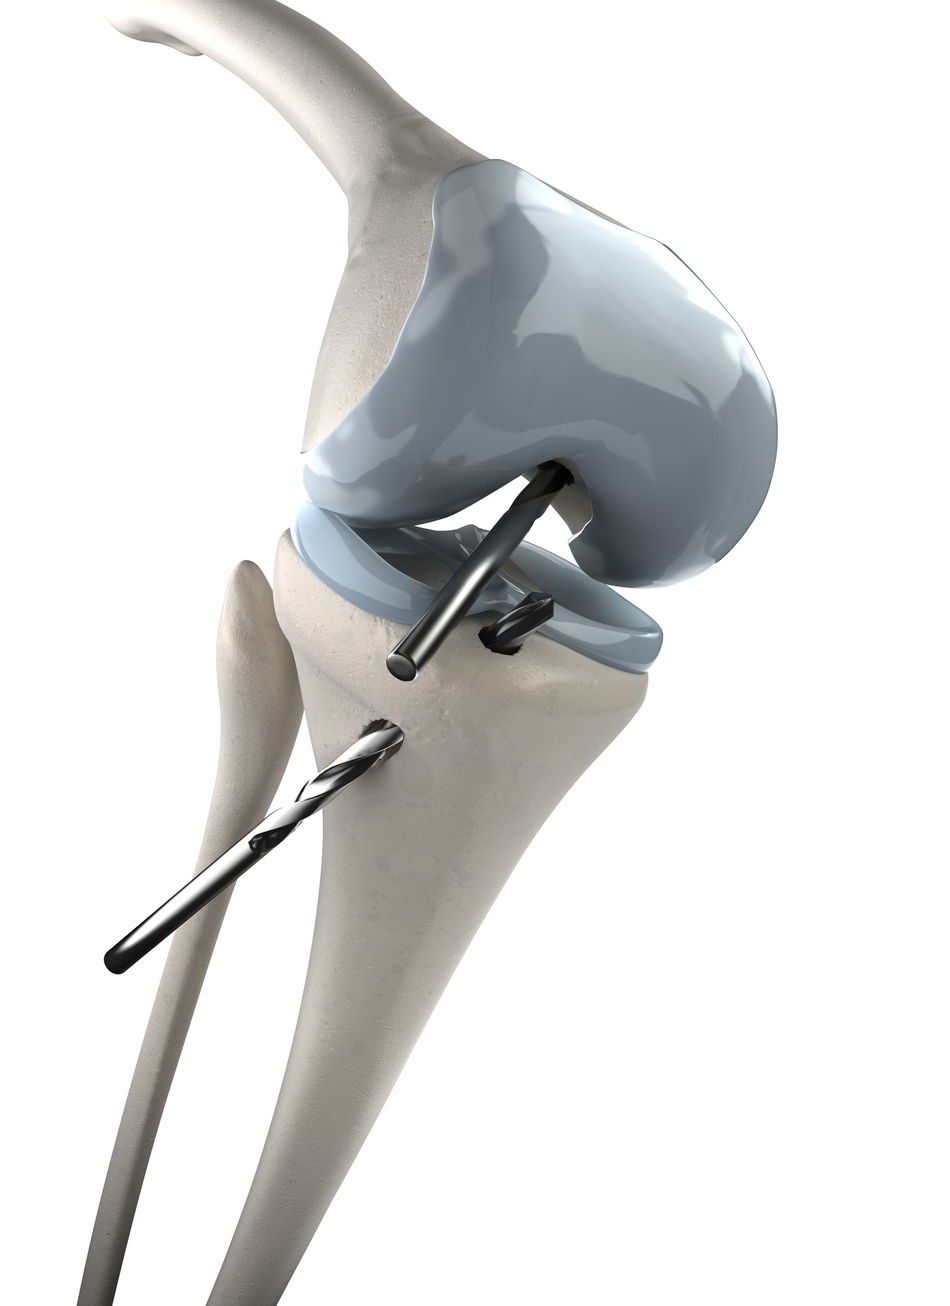 Should You Have Your Knee Scoped After an Injury?